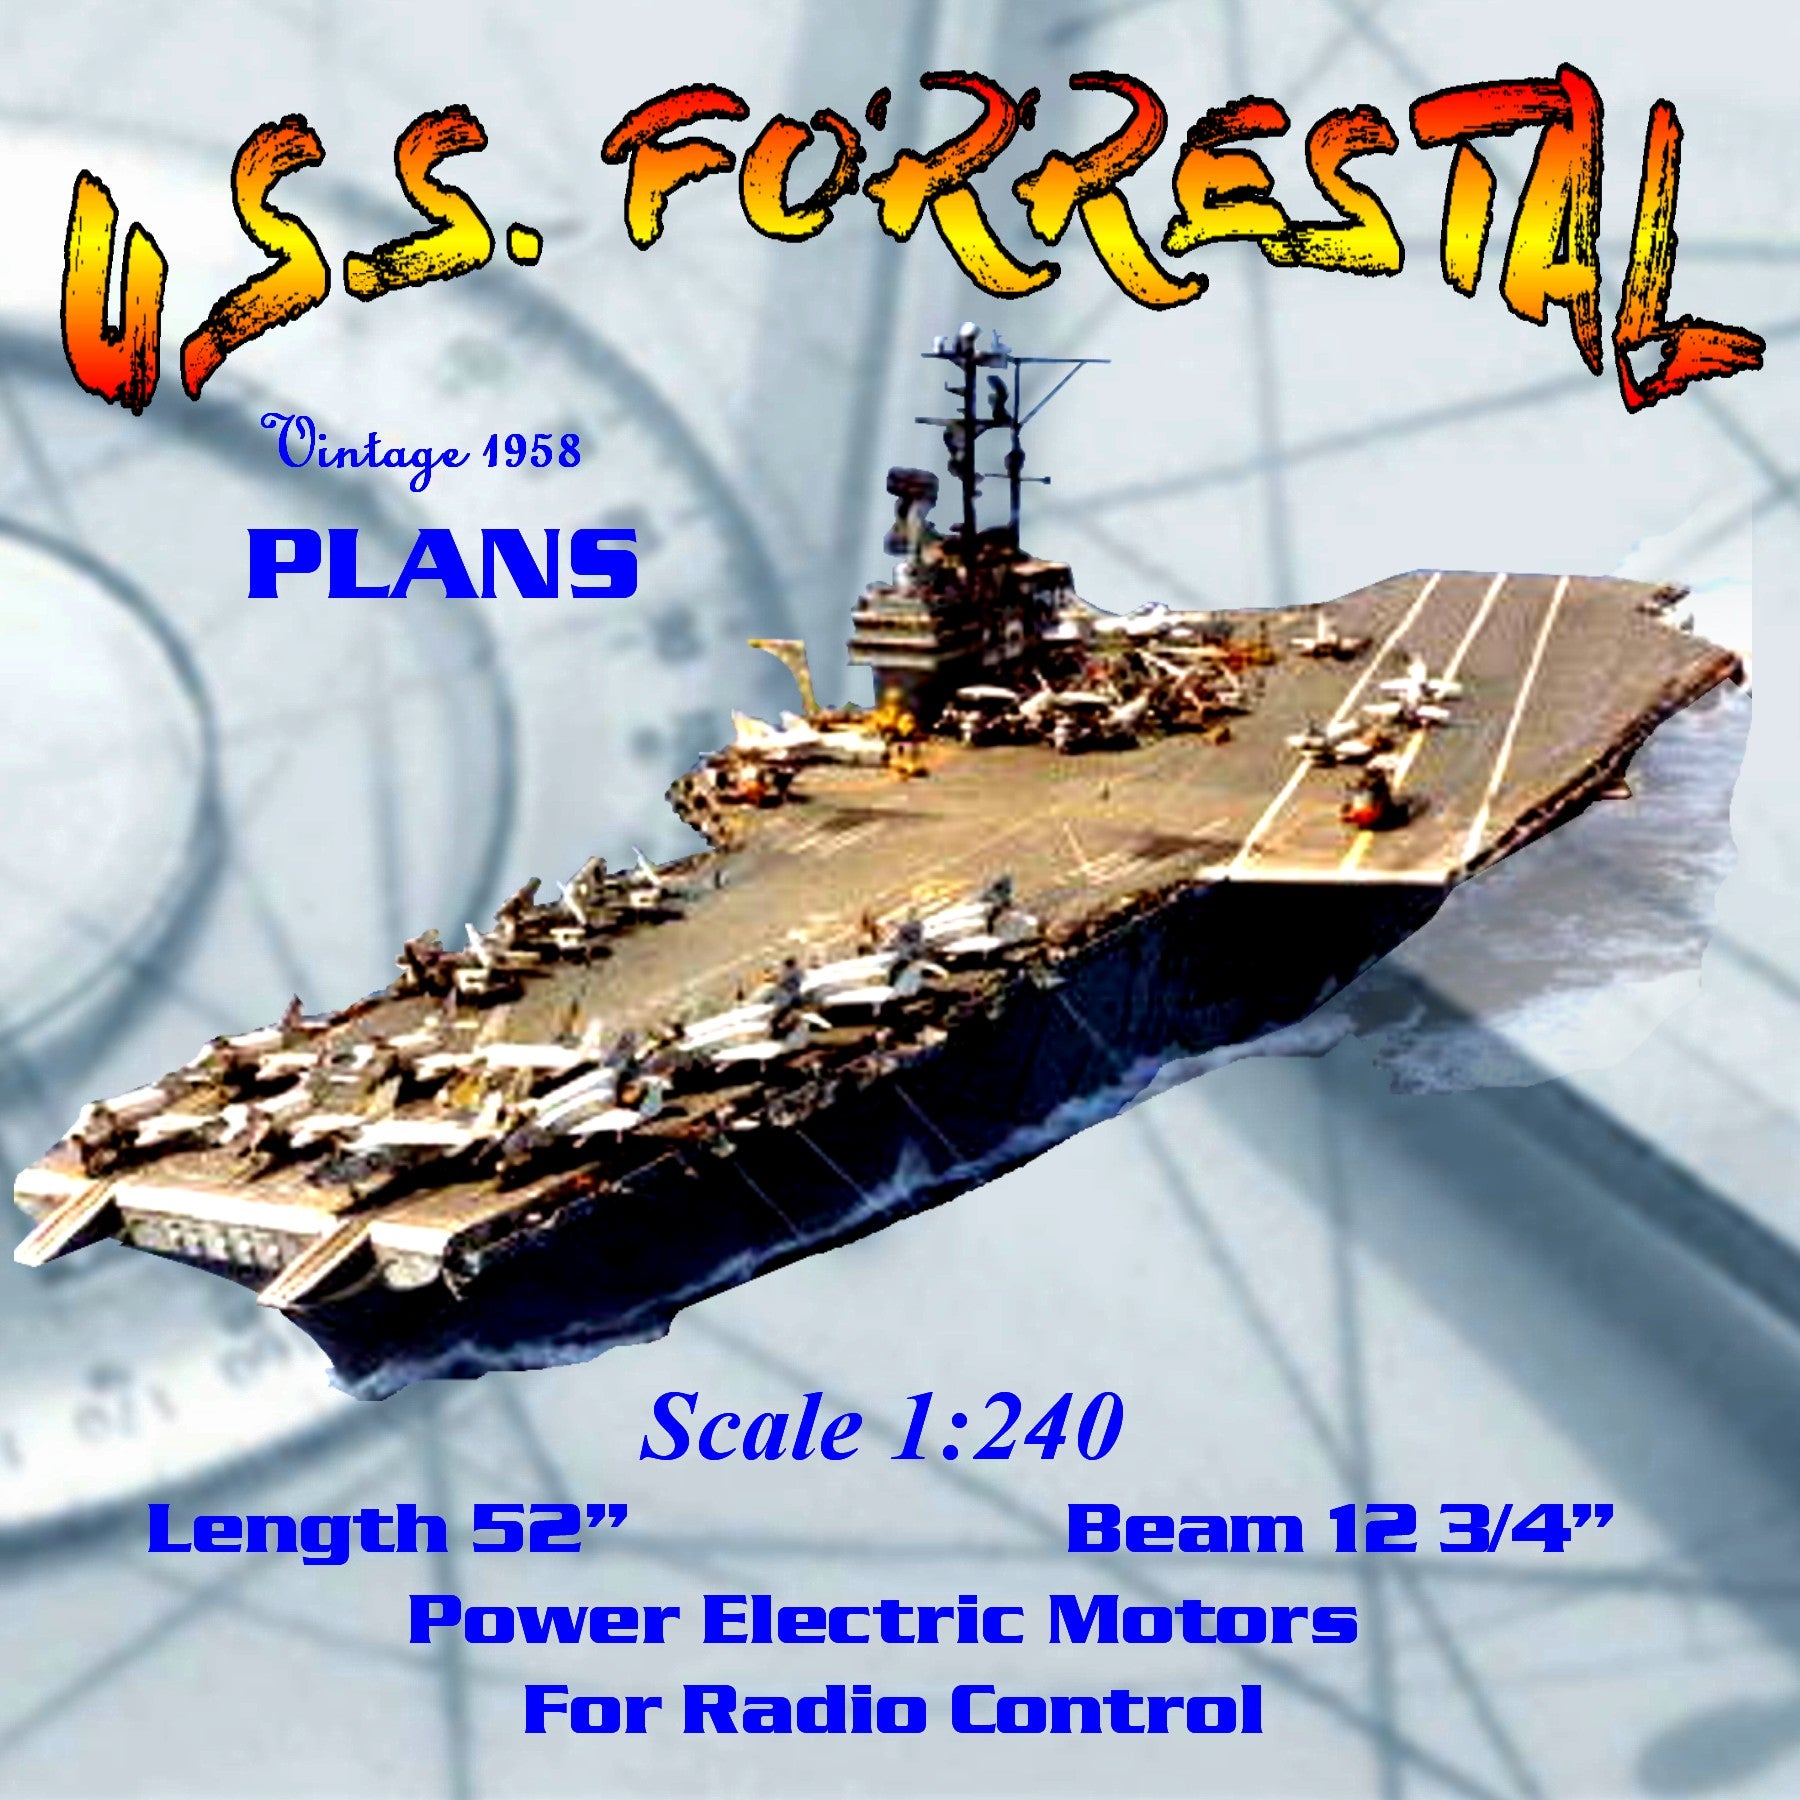 full size printed plan vintage 1958 scale 1:240 aircraft carrier u.s.s. forrestal  what a model she makes!